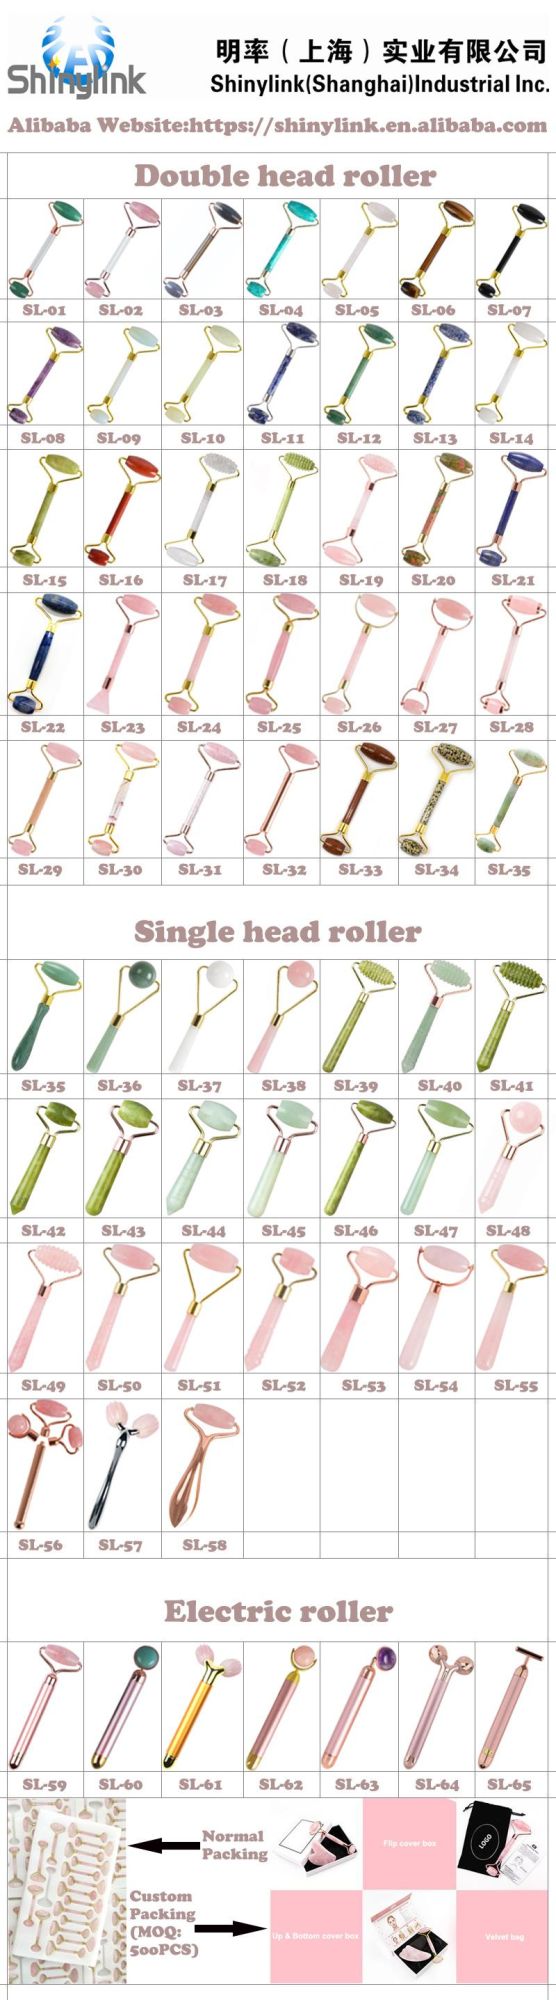 Make Your Face Skin Smoother and Looks Younger Green Dong Ling Jade Roller Massage Tool